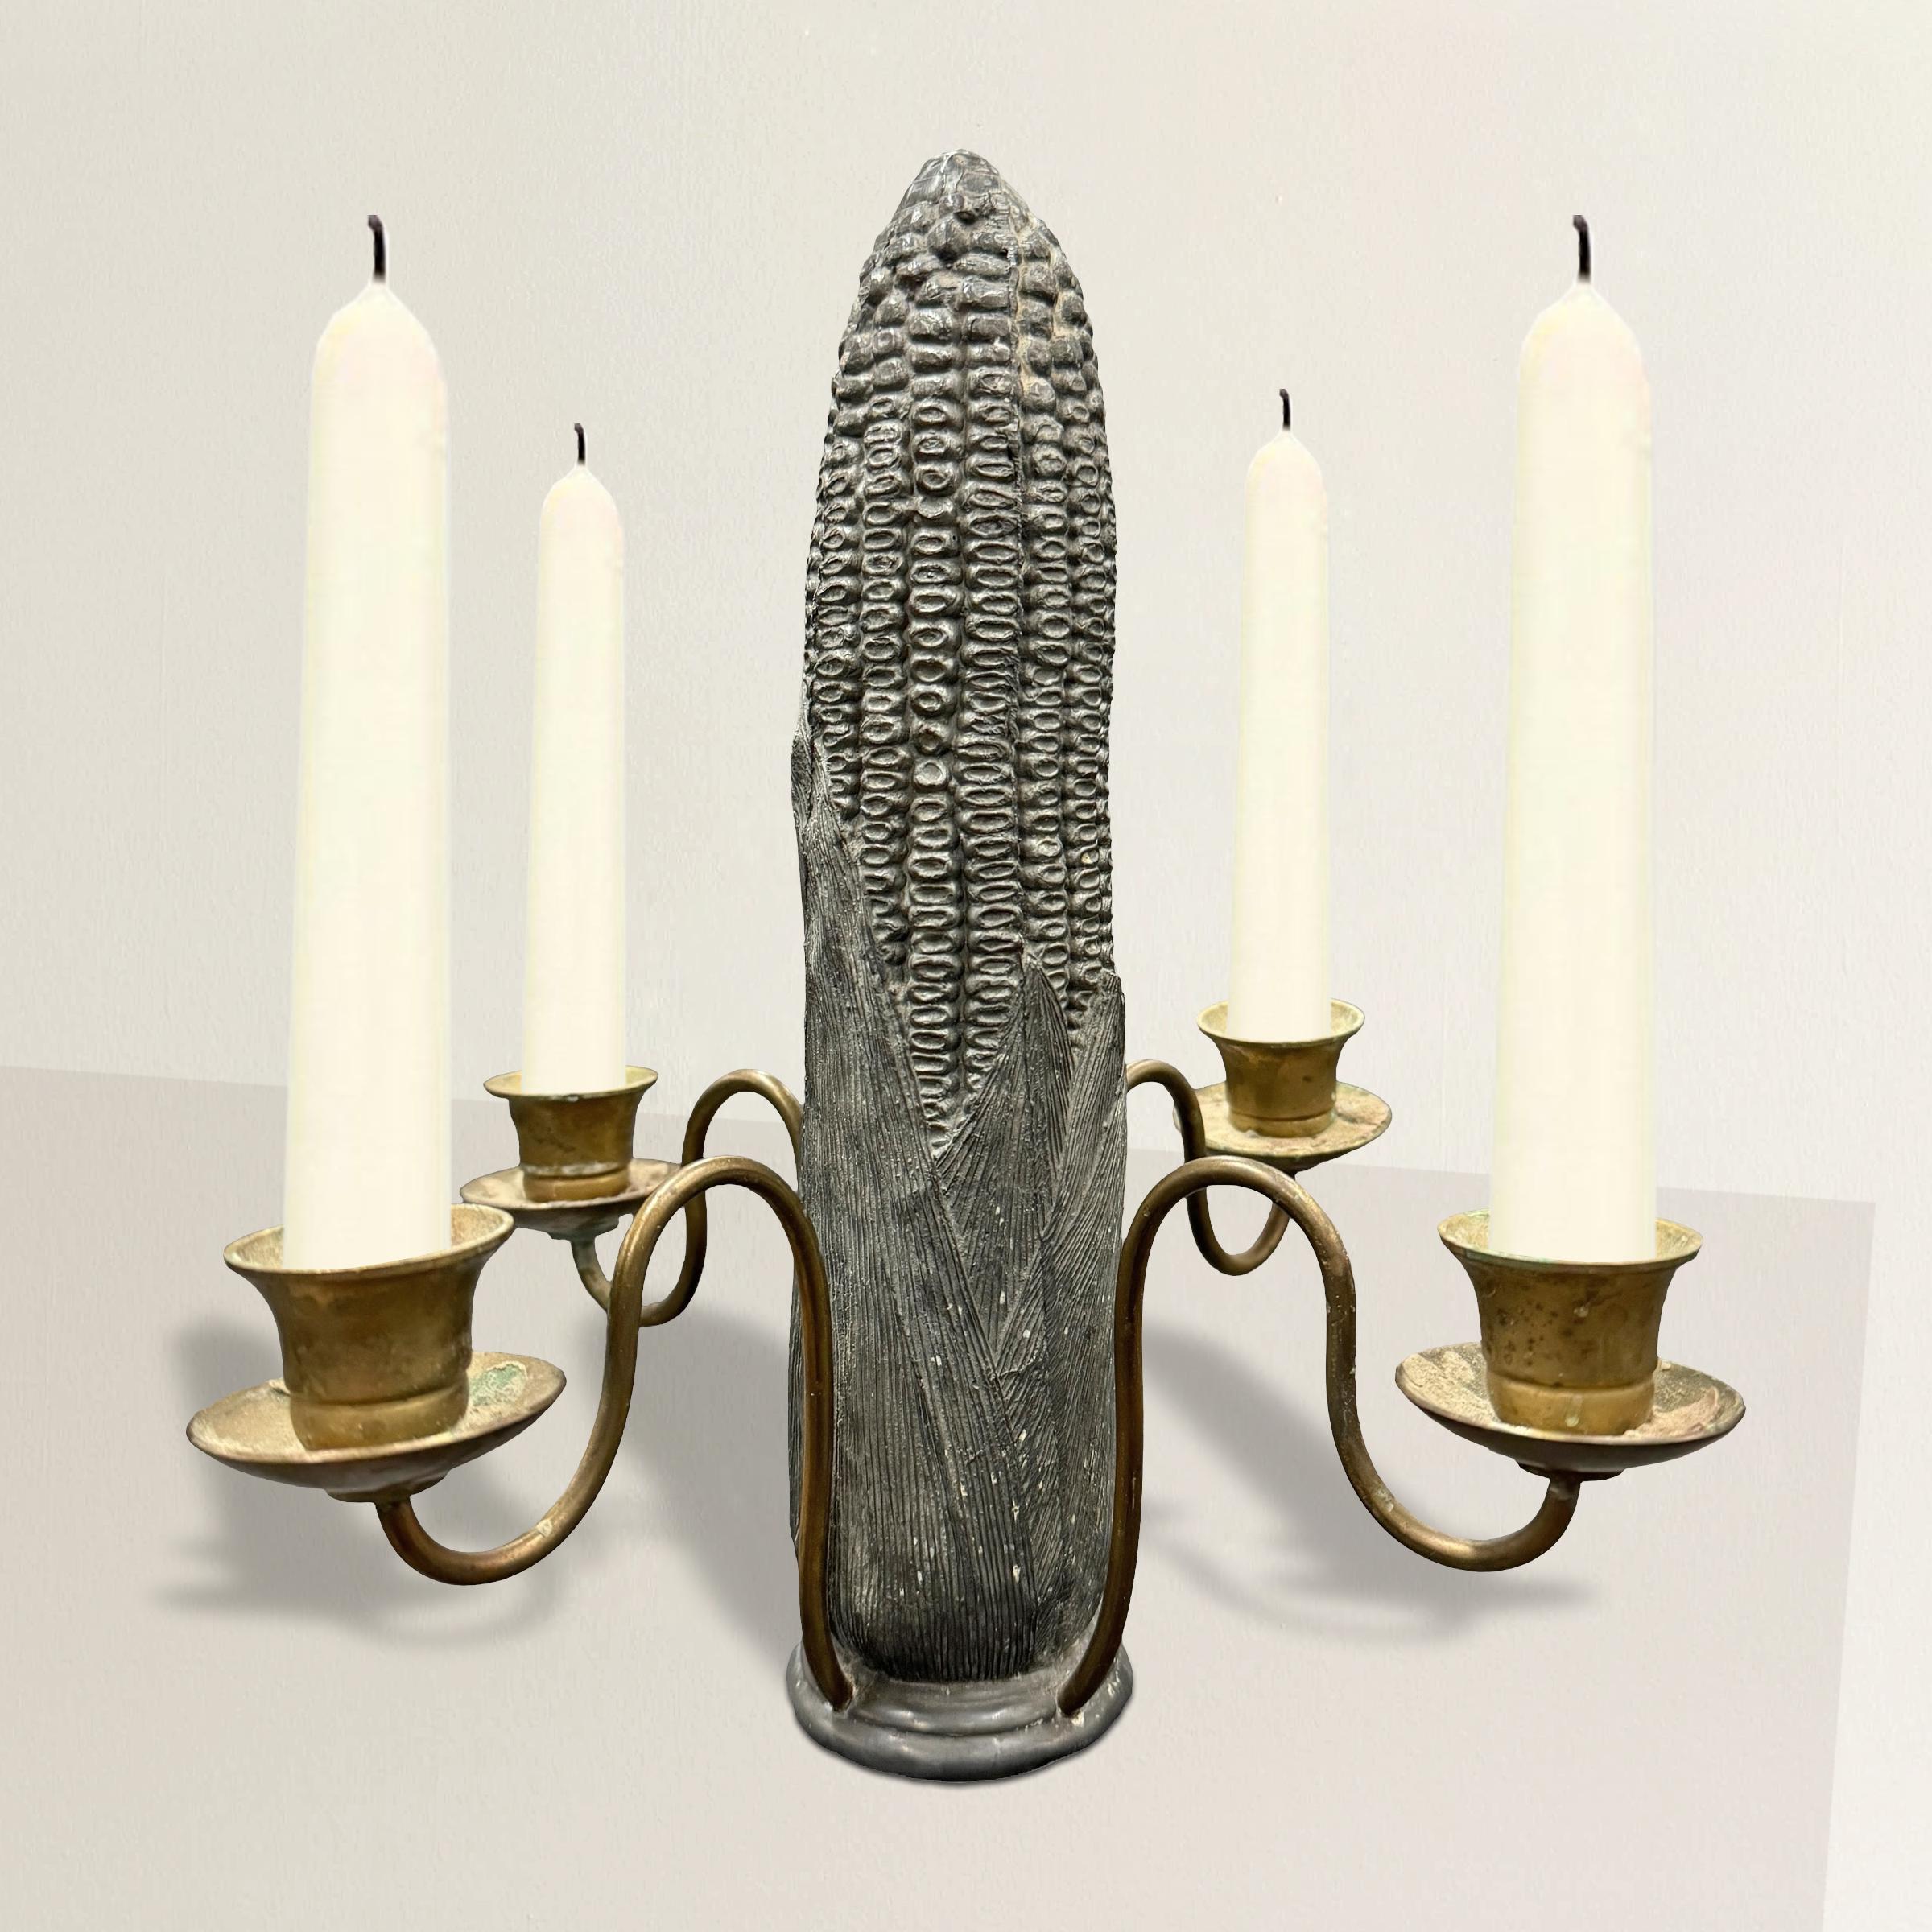 This mid-20th-century American solid pewter corncob candelabra with four brass arms is a marvel of quirky design. Crafted with meticulous attention to detail, it stands as a testament to the creativity and ingenuity of its maker. Its unusual